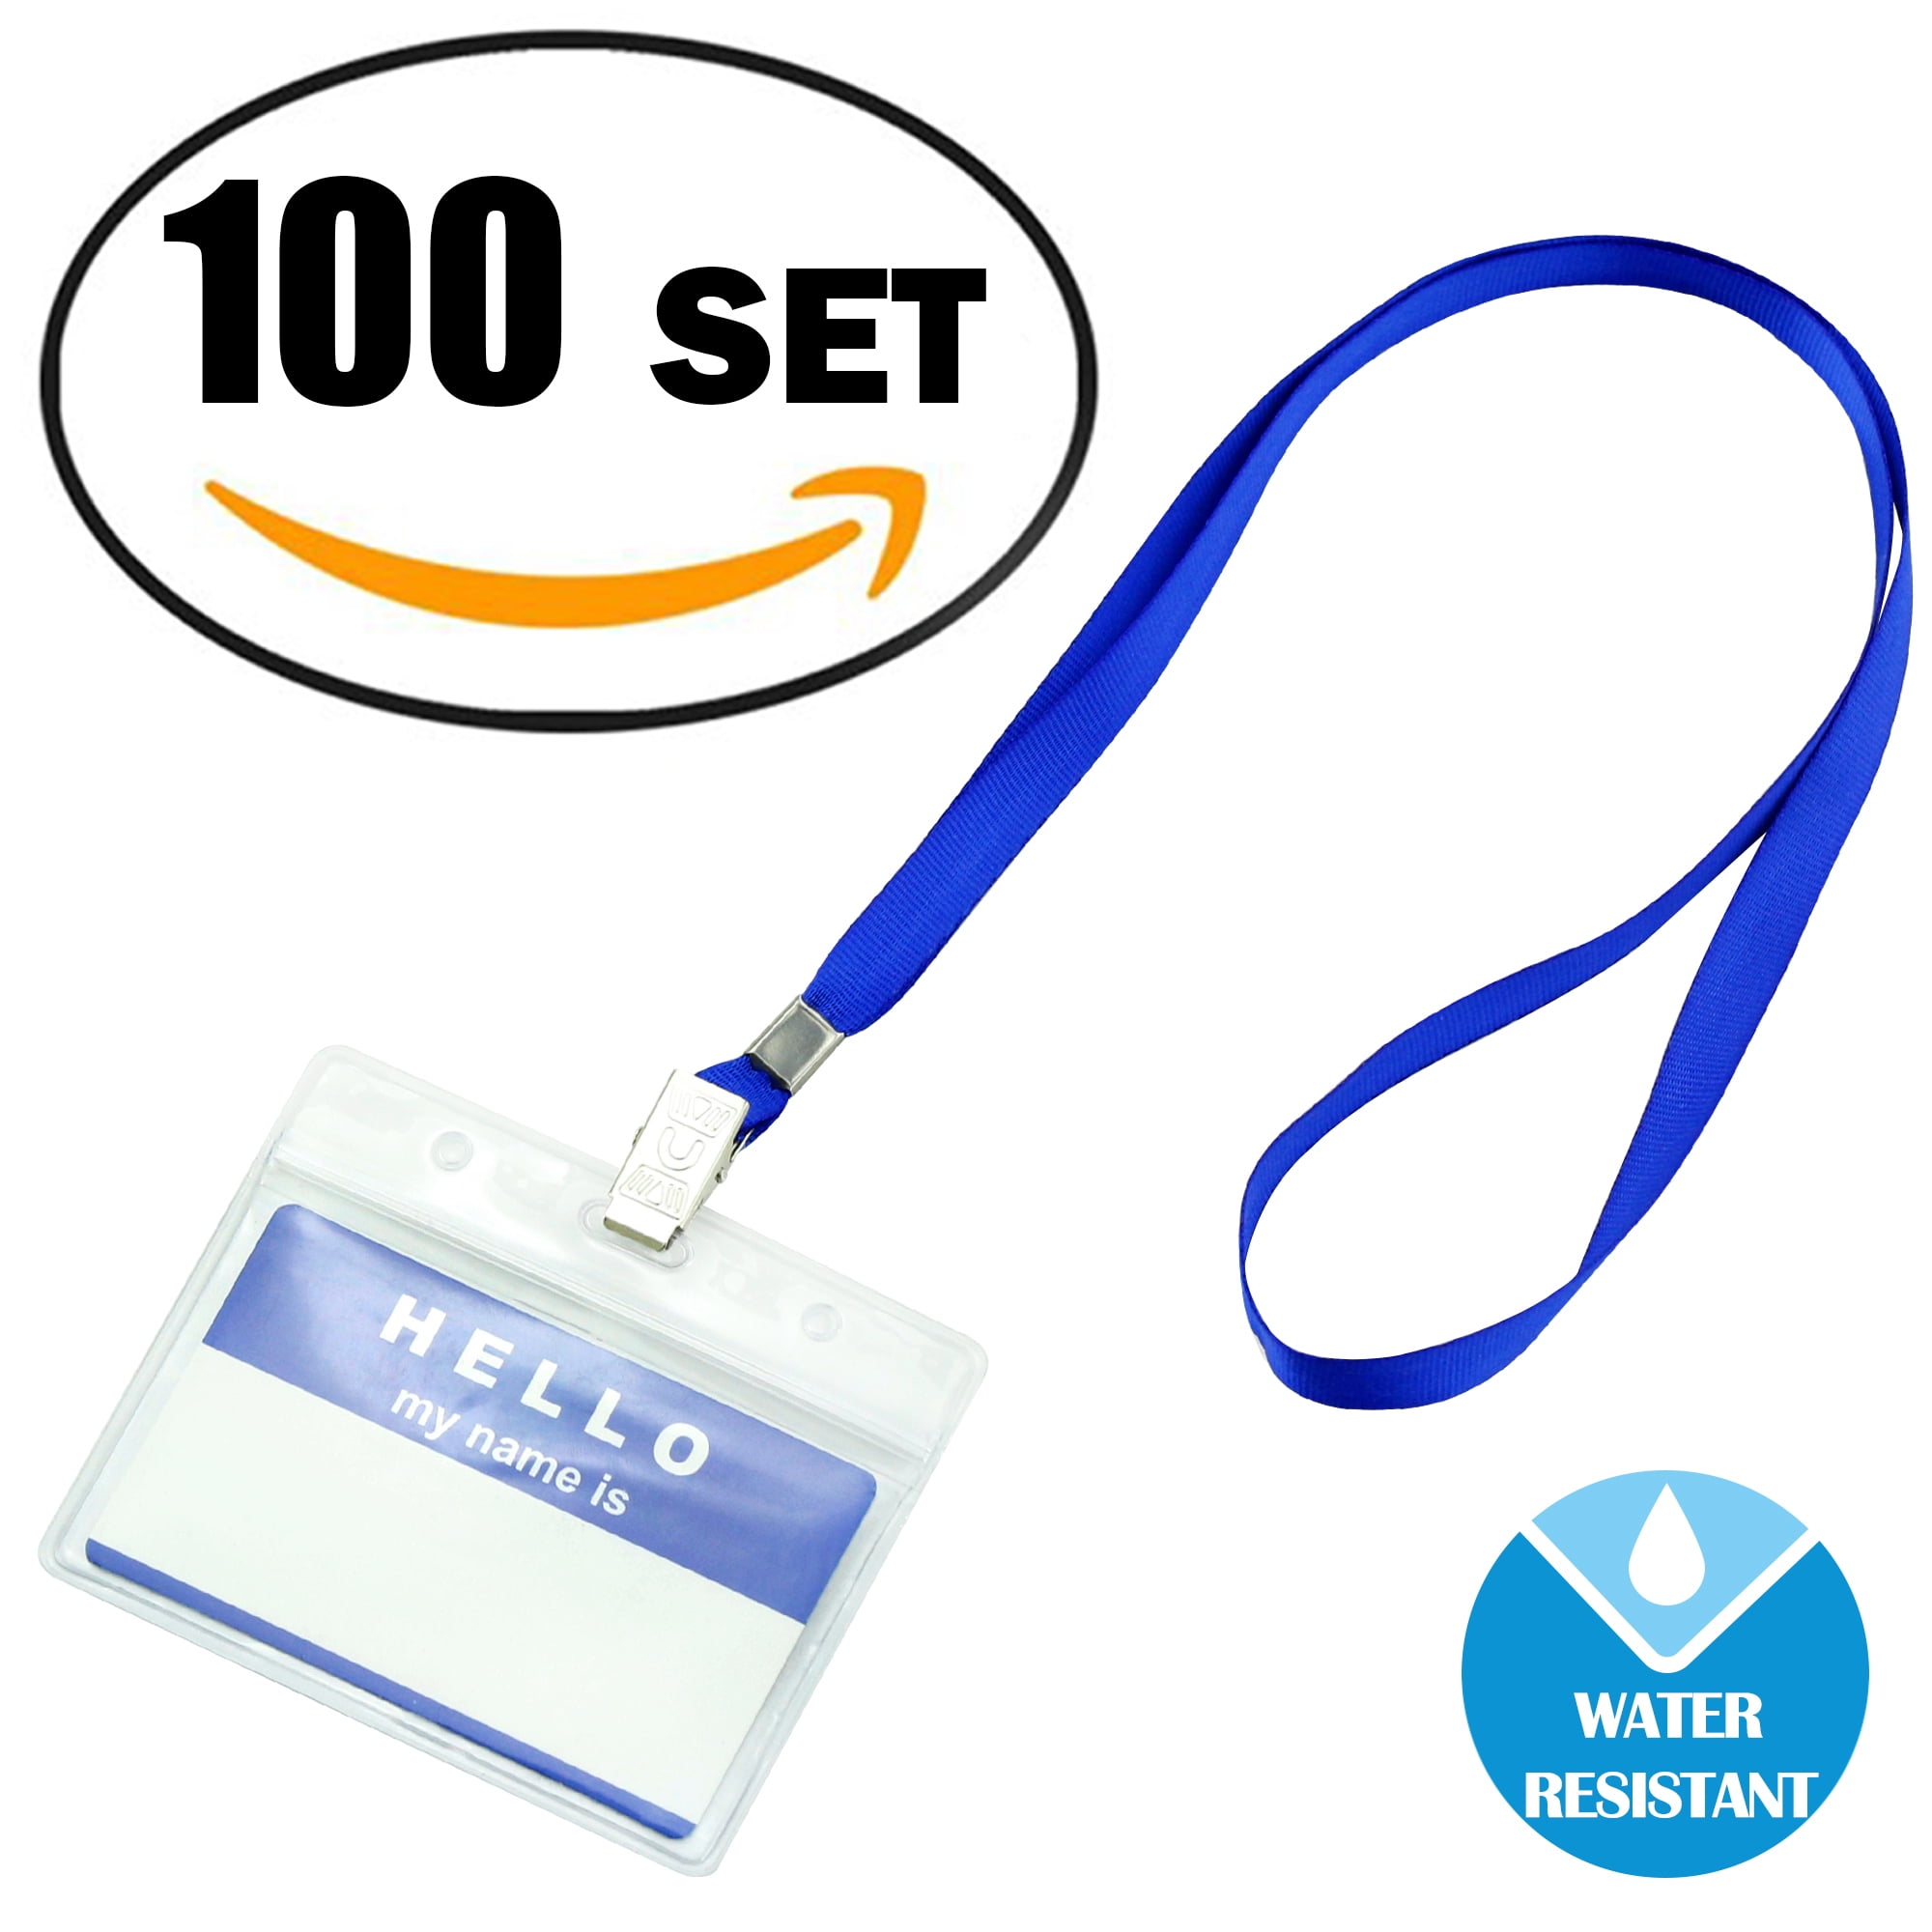 Gimars Waterproof Plastic Name s Id Card Holder Lanyards For Kids Name Labels School Camp Field Trip Business Event Trade Show Conference Badge Holder Name With Lanyard 150 Pack Walmart Com